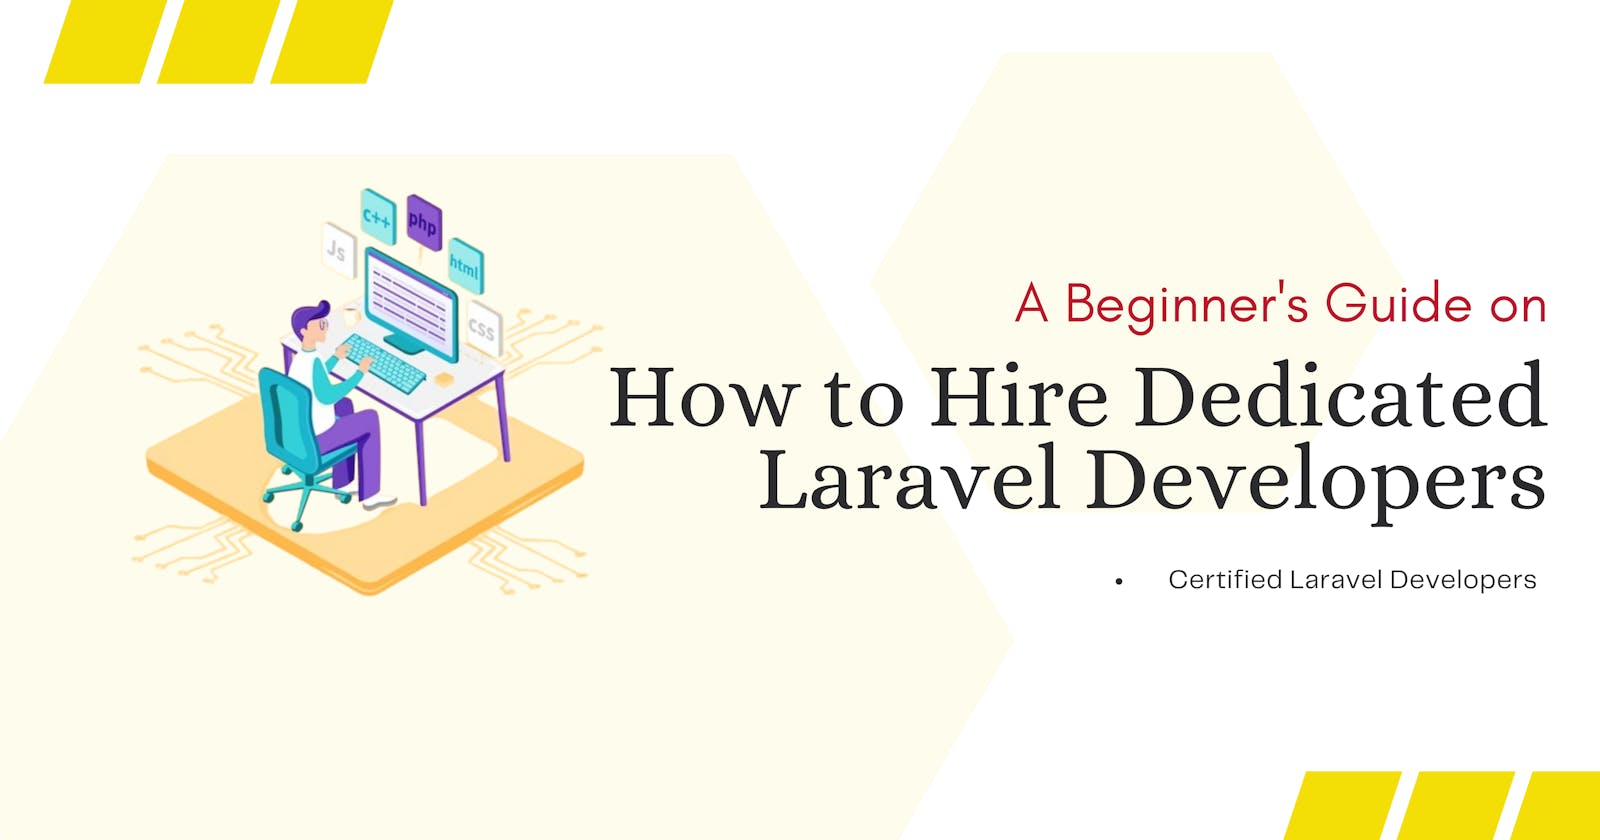 A Beginner's Guide on How to Hire Dedicated Laravel Developers